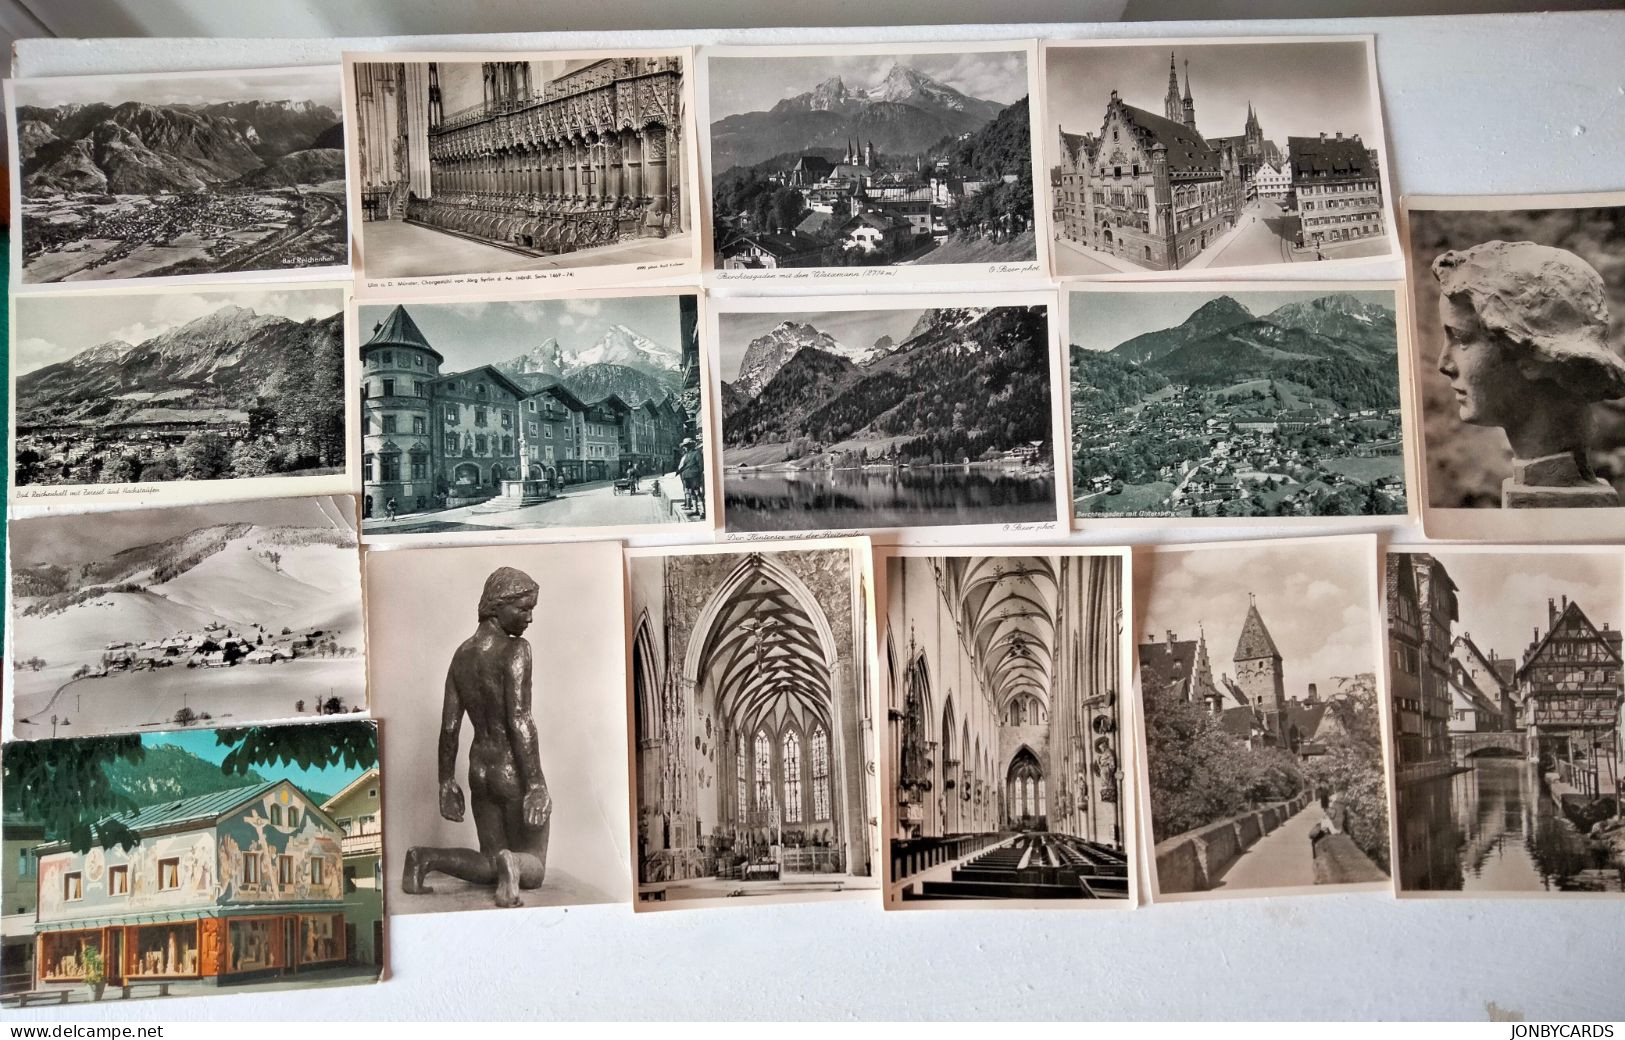 Dèstockage.Mixed Lot Of 16 Germany Postcards.#44 - Collections & Lots